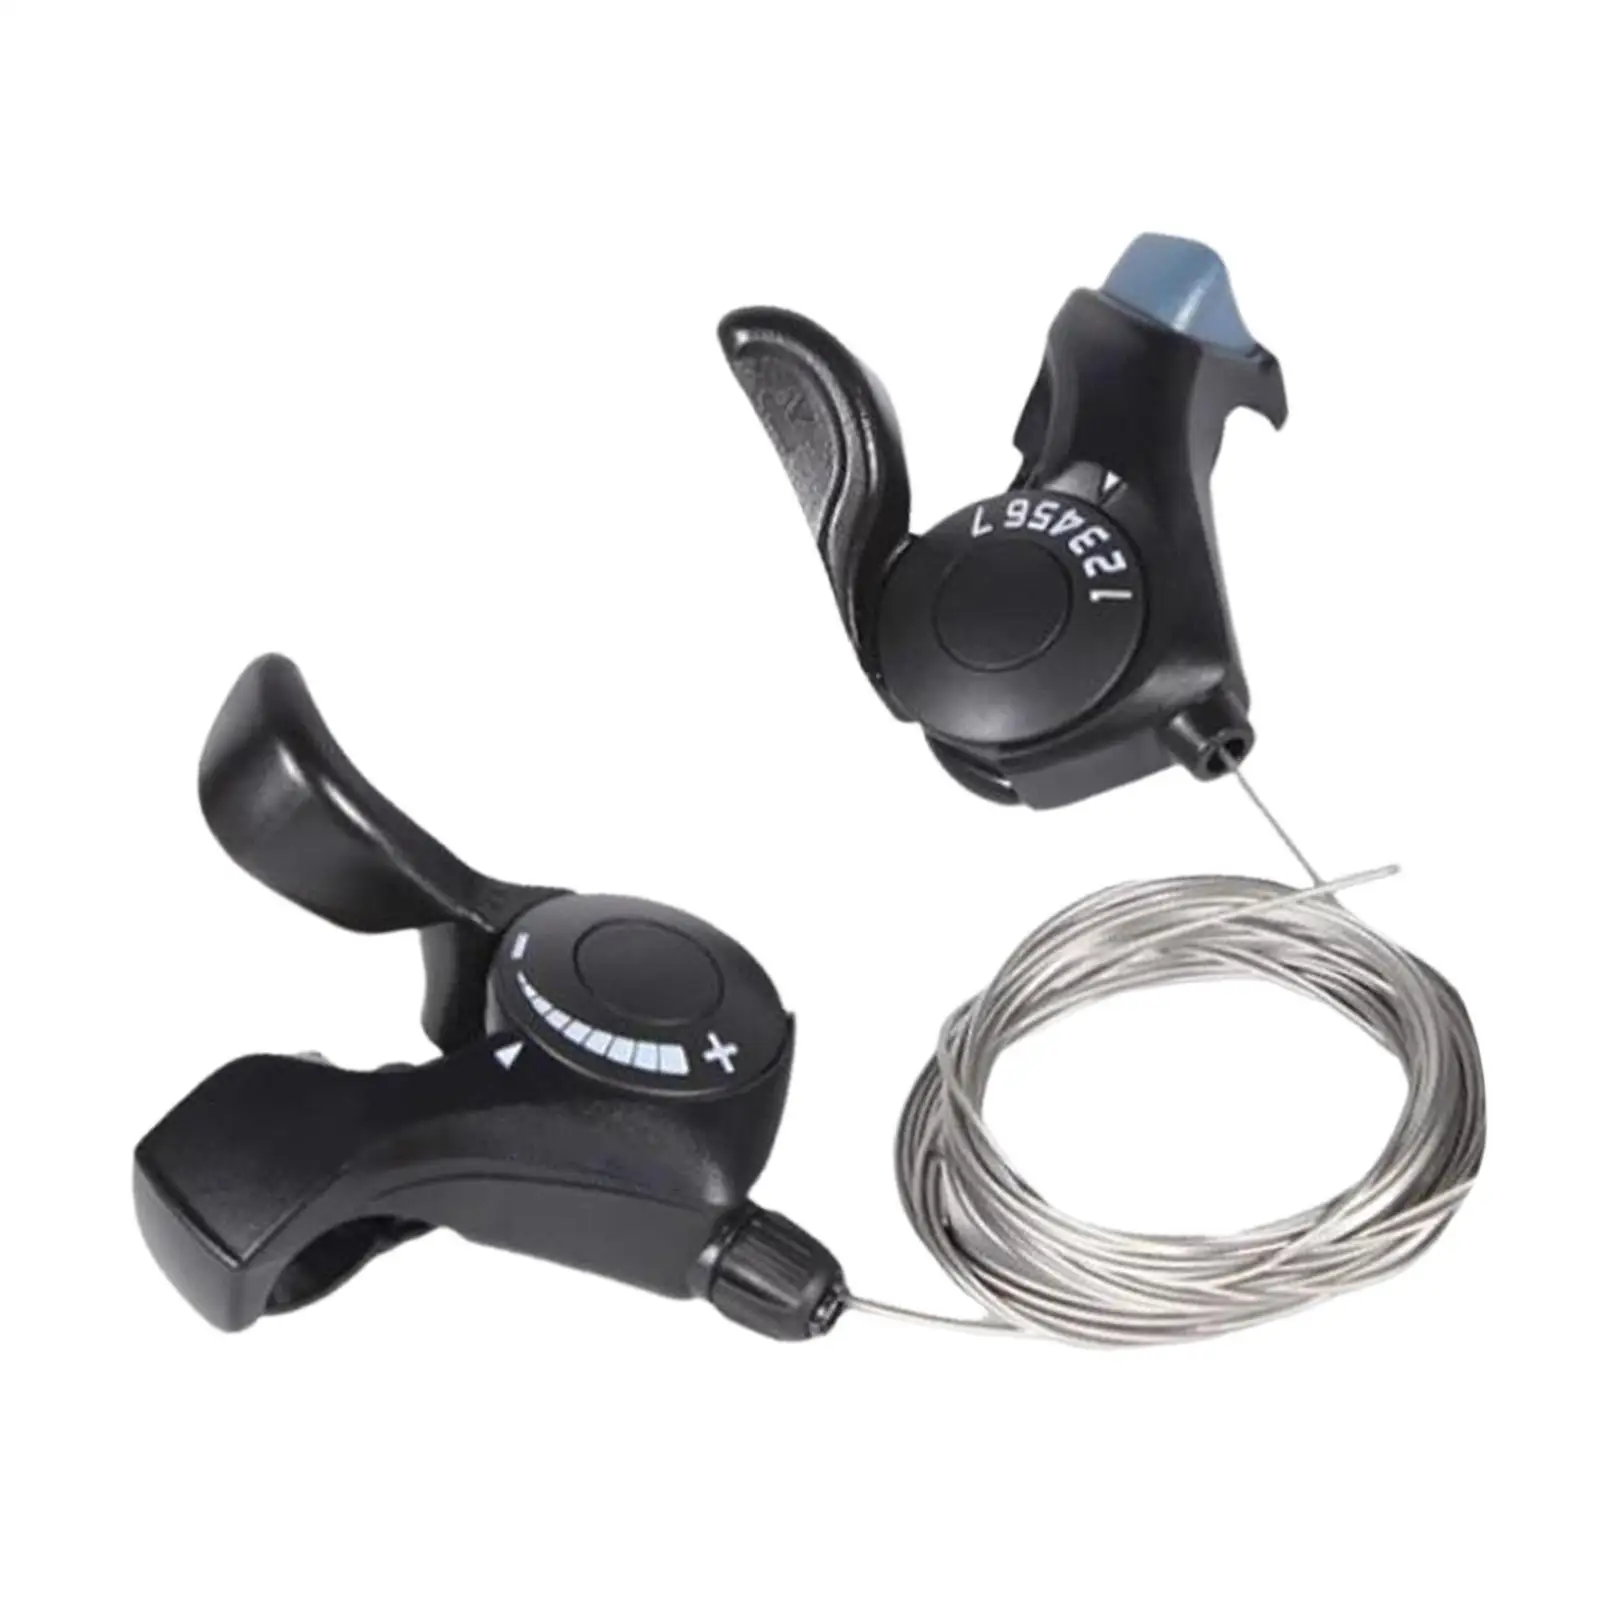 1 Pair Bike Shifters Bicycle Left Right Lever Shifter with Cables Bicycle Speed Shifter for Folding Bike Mountain Bike Tool